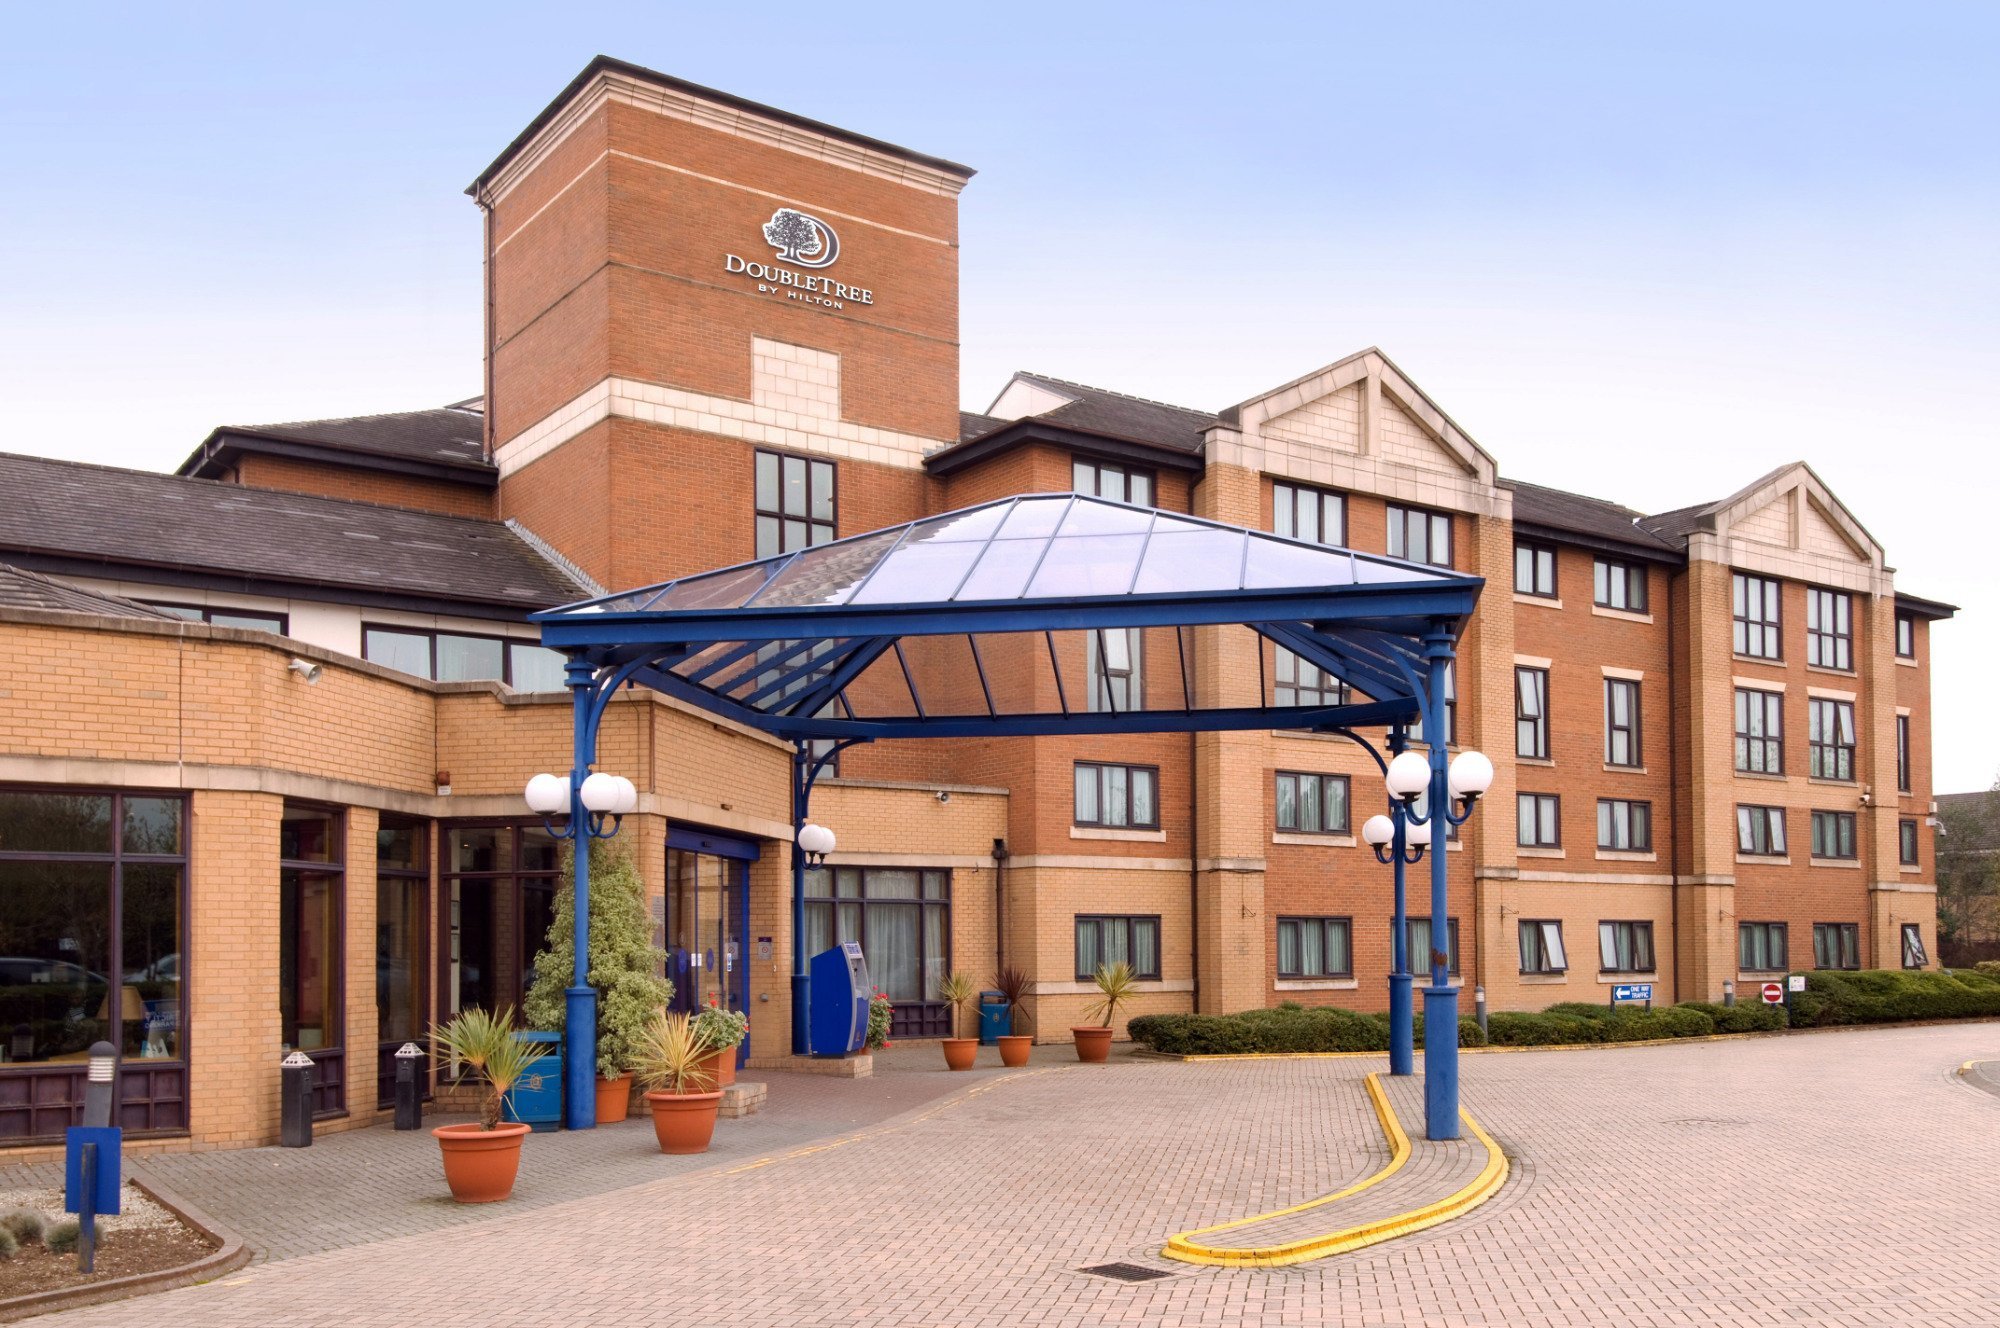 Photo of DoubleTree by Hilton Hotel Coventry, Coventry, Walsgrave Triangle, United Kingdom